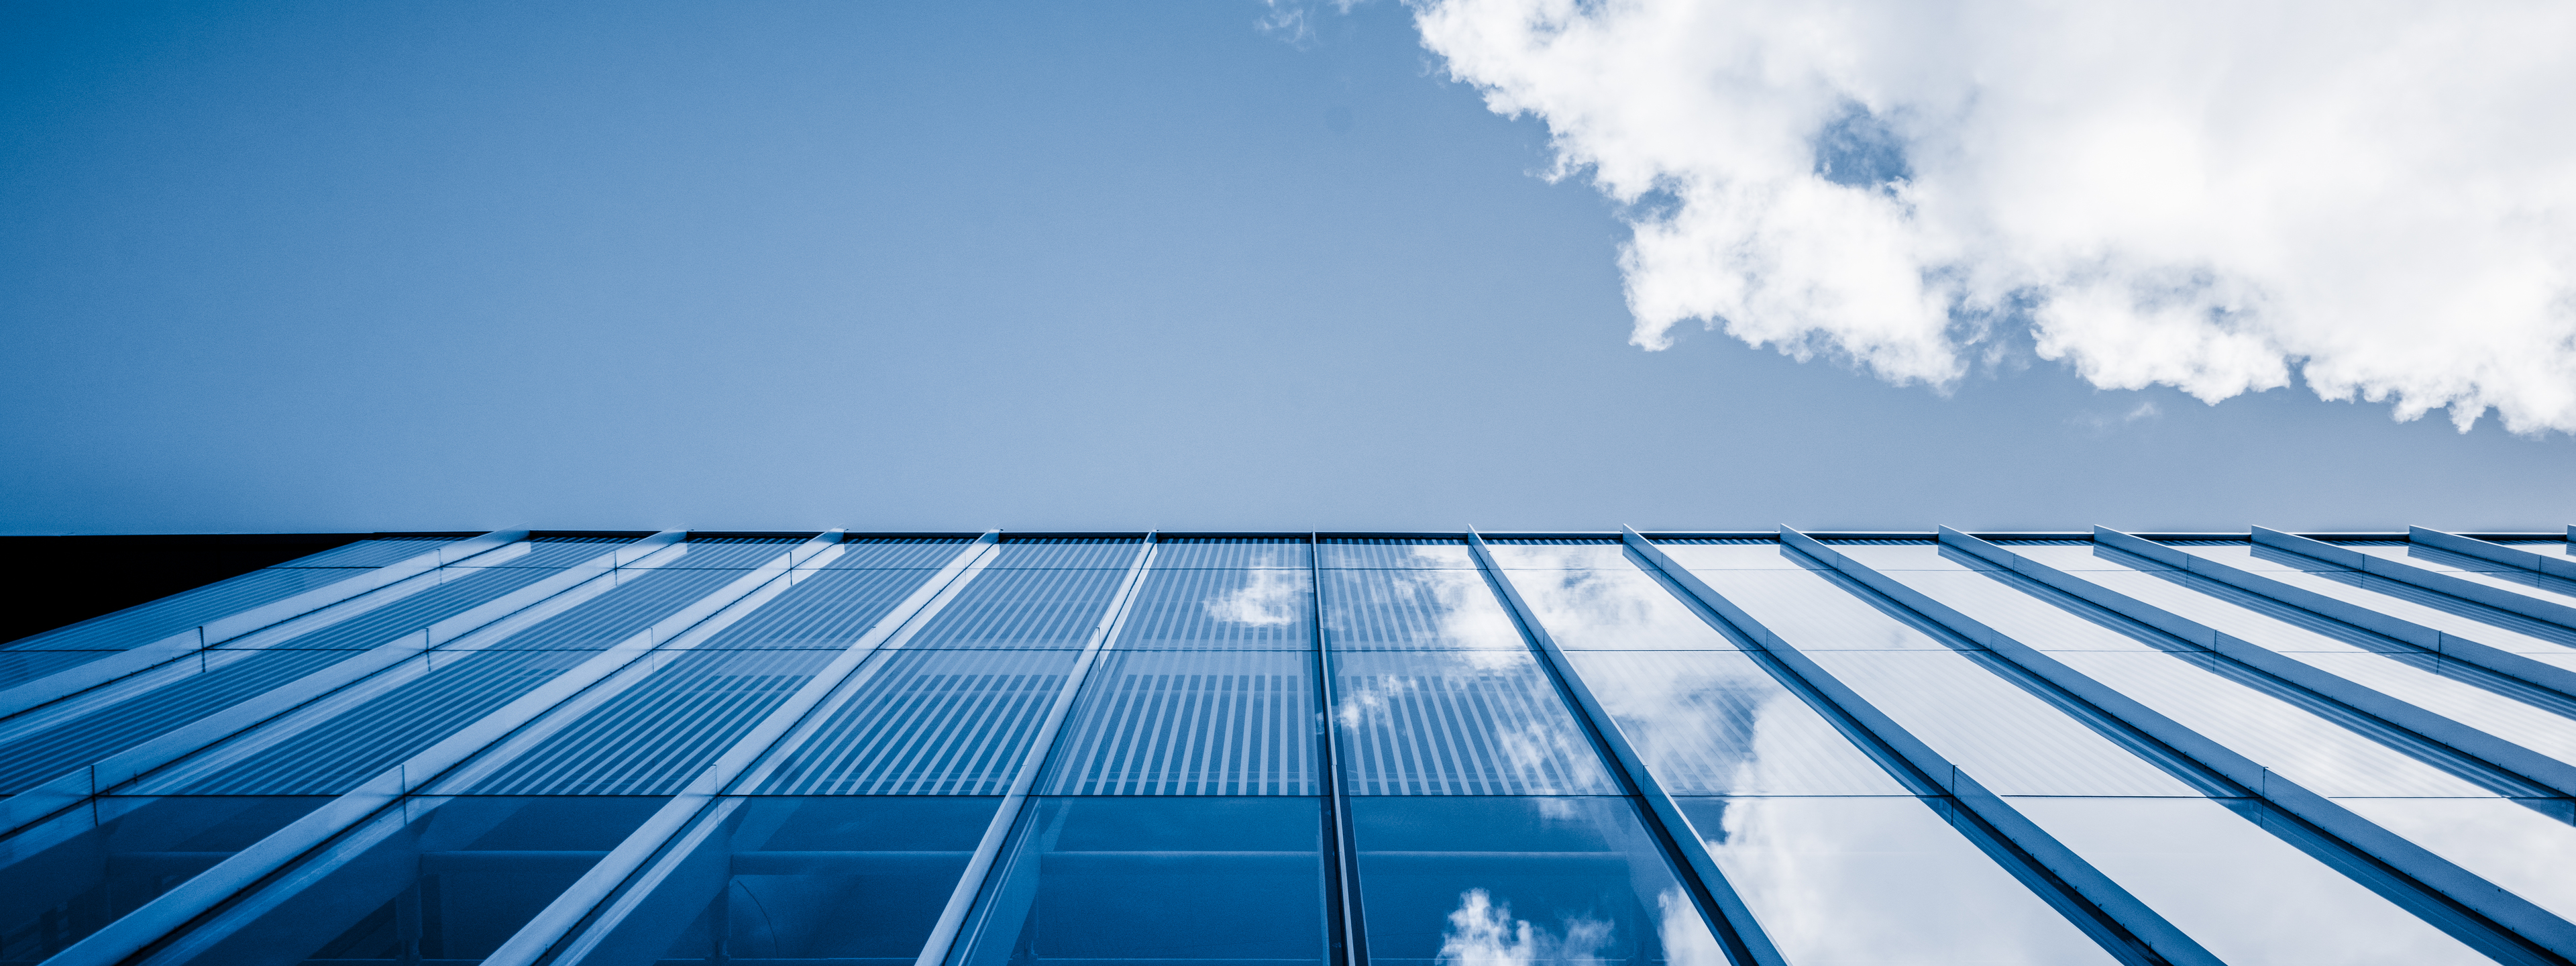 Clouds reflected in windows of modern office building,